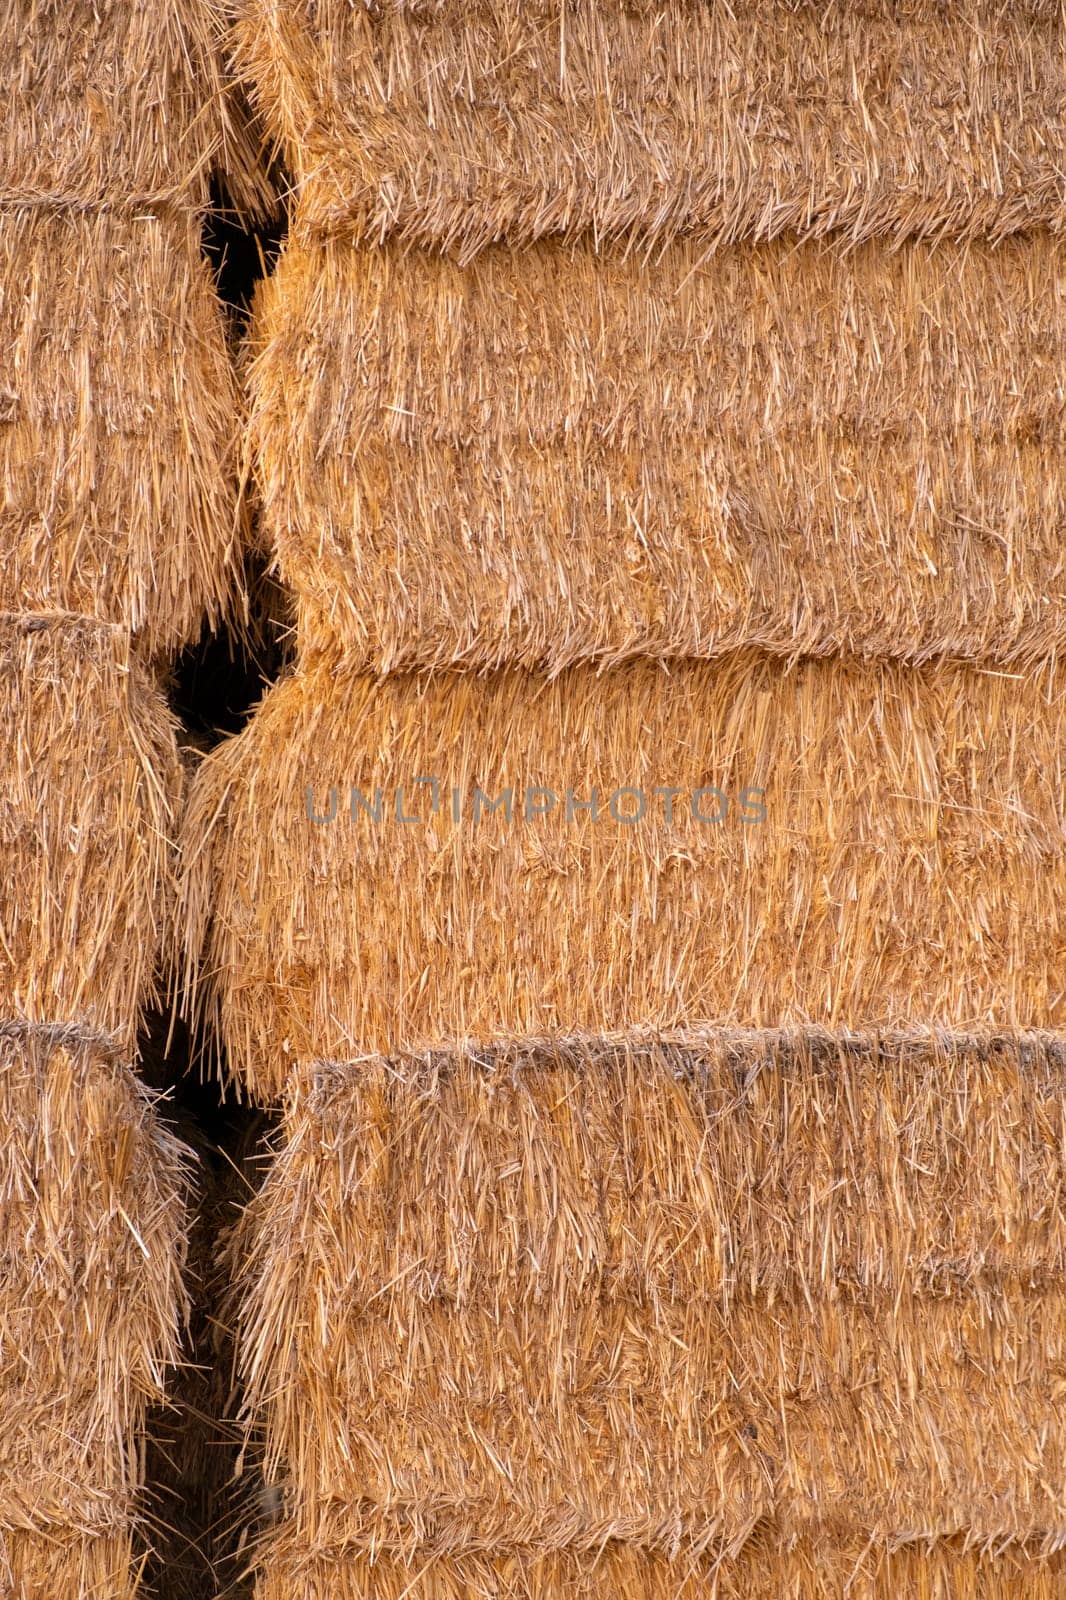 stack of yellow hay straw bales background alfalfa verticle by bRollGO